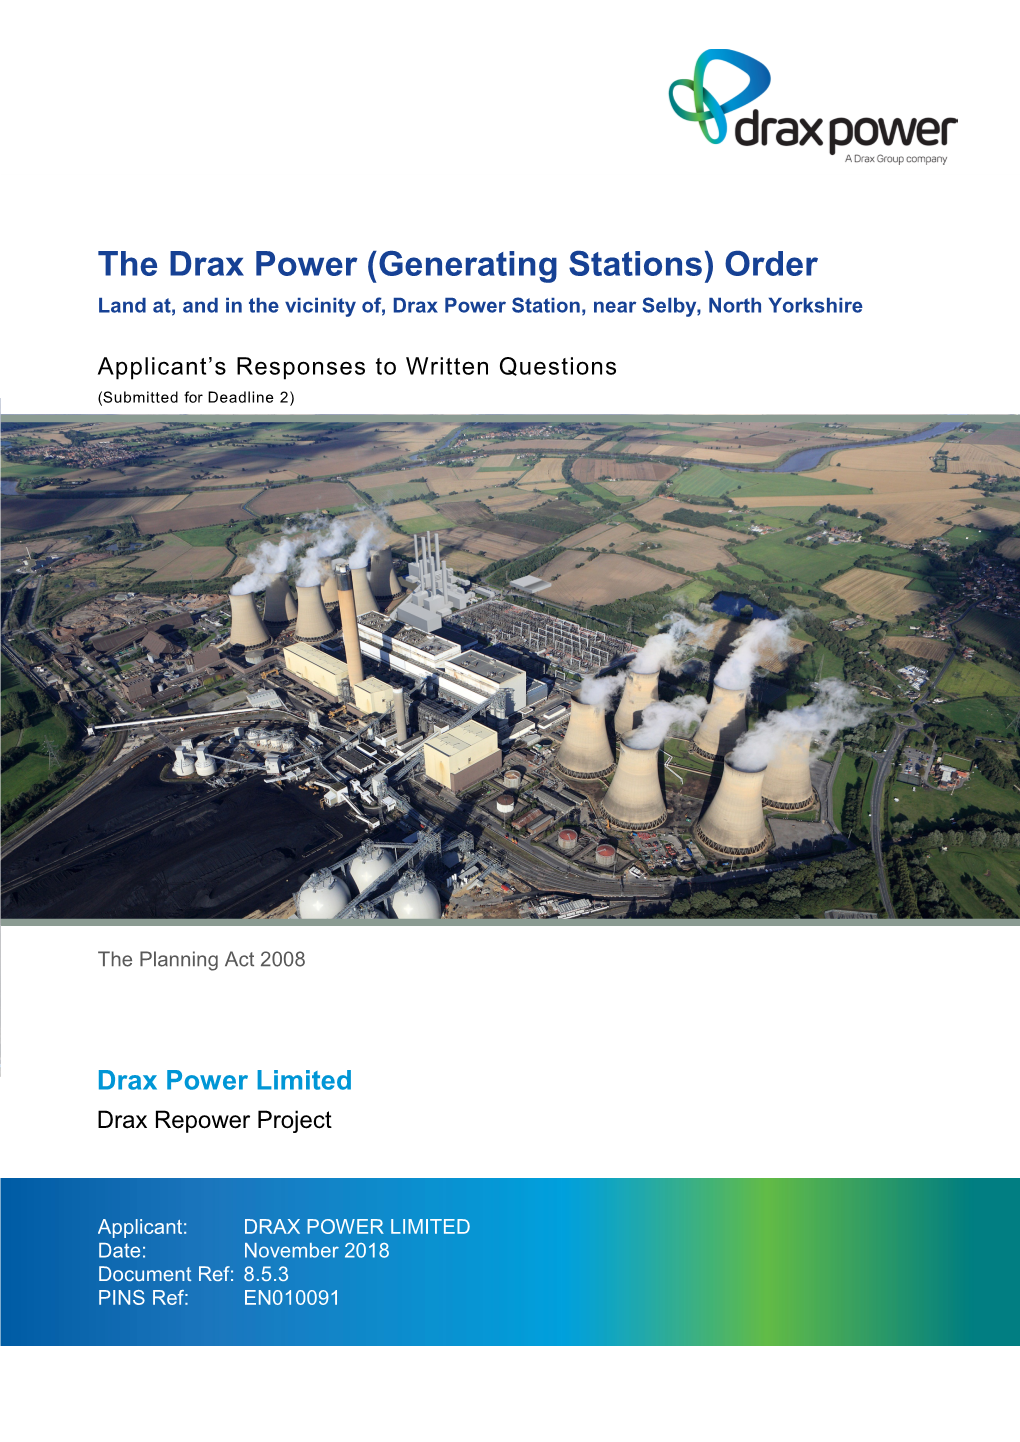 The Drax Power (Generating Stations) Order Land At, and in the Vicinity Of, Drax Power Station, Near Selby, North Yorkshire